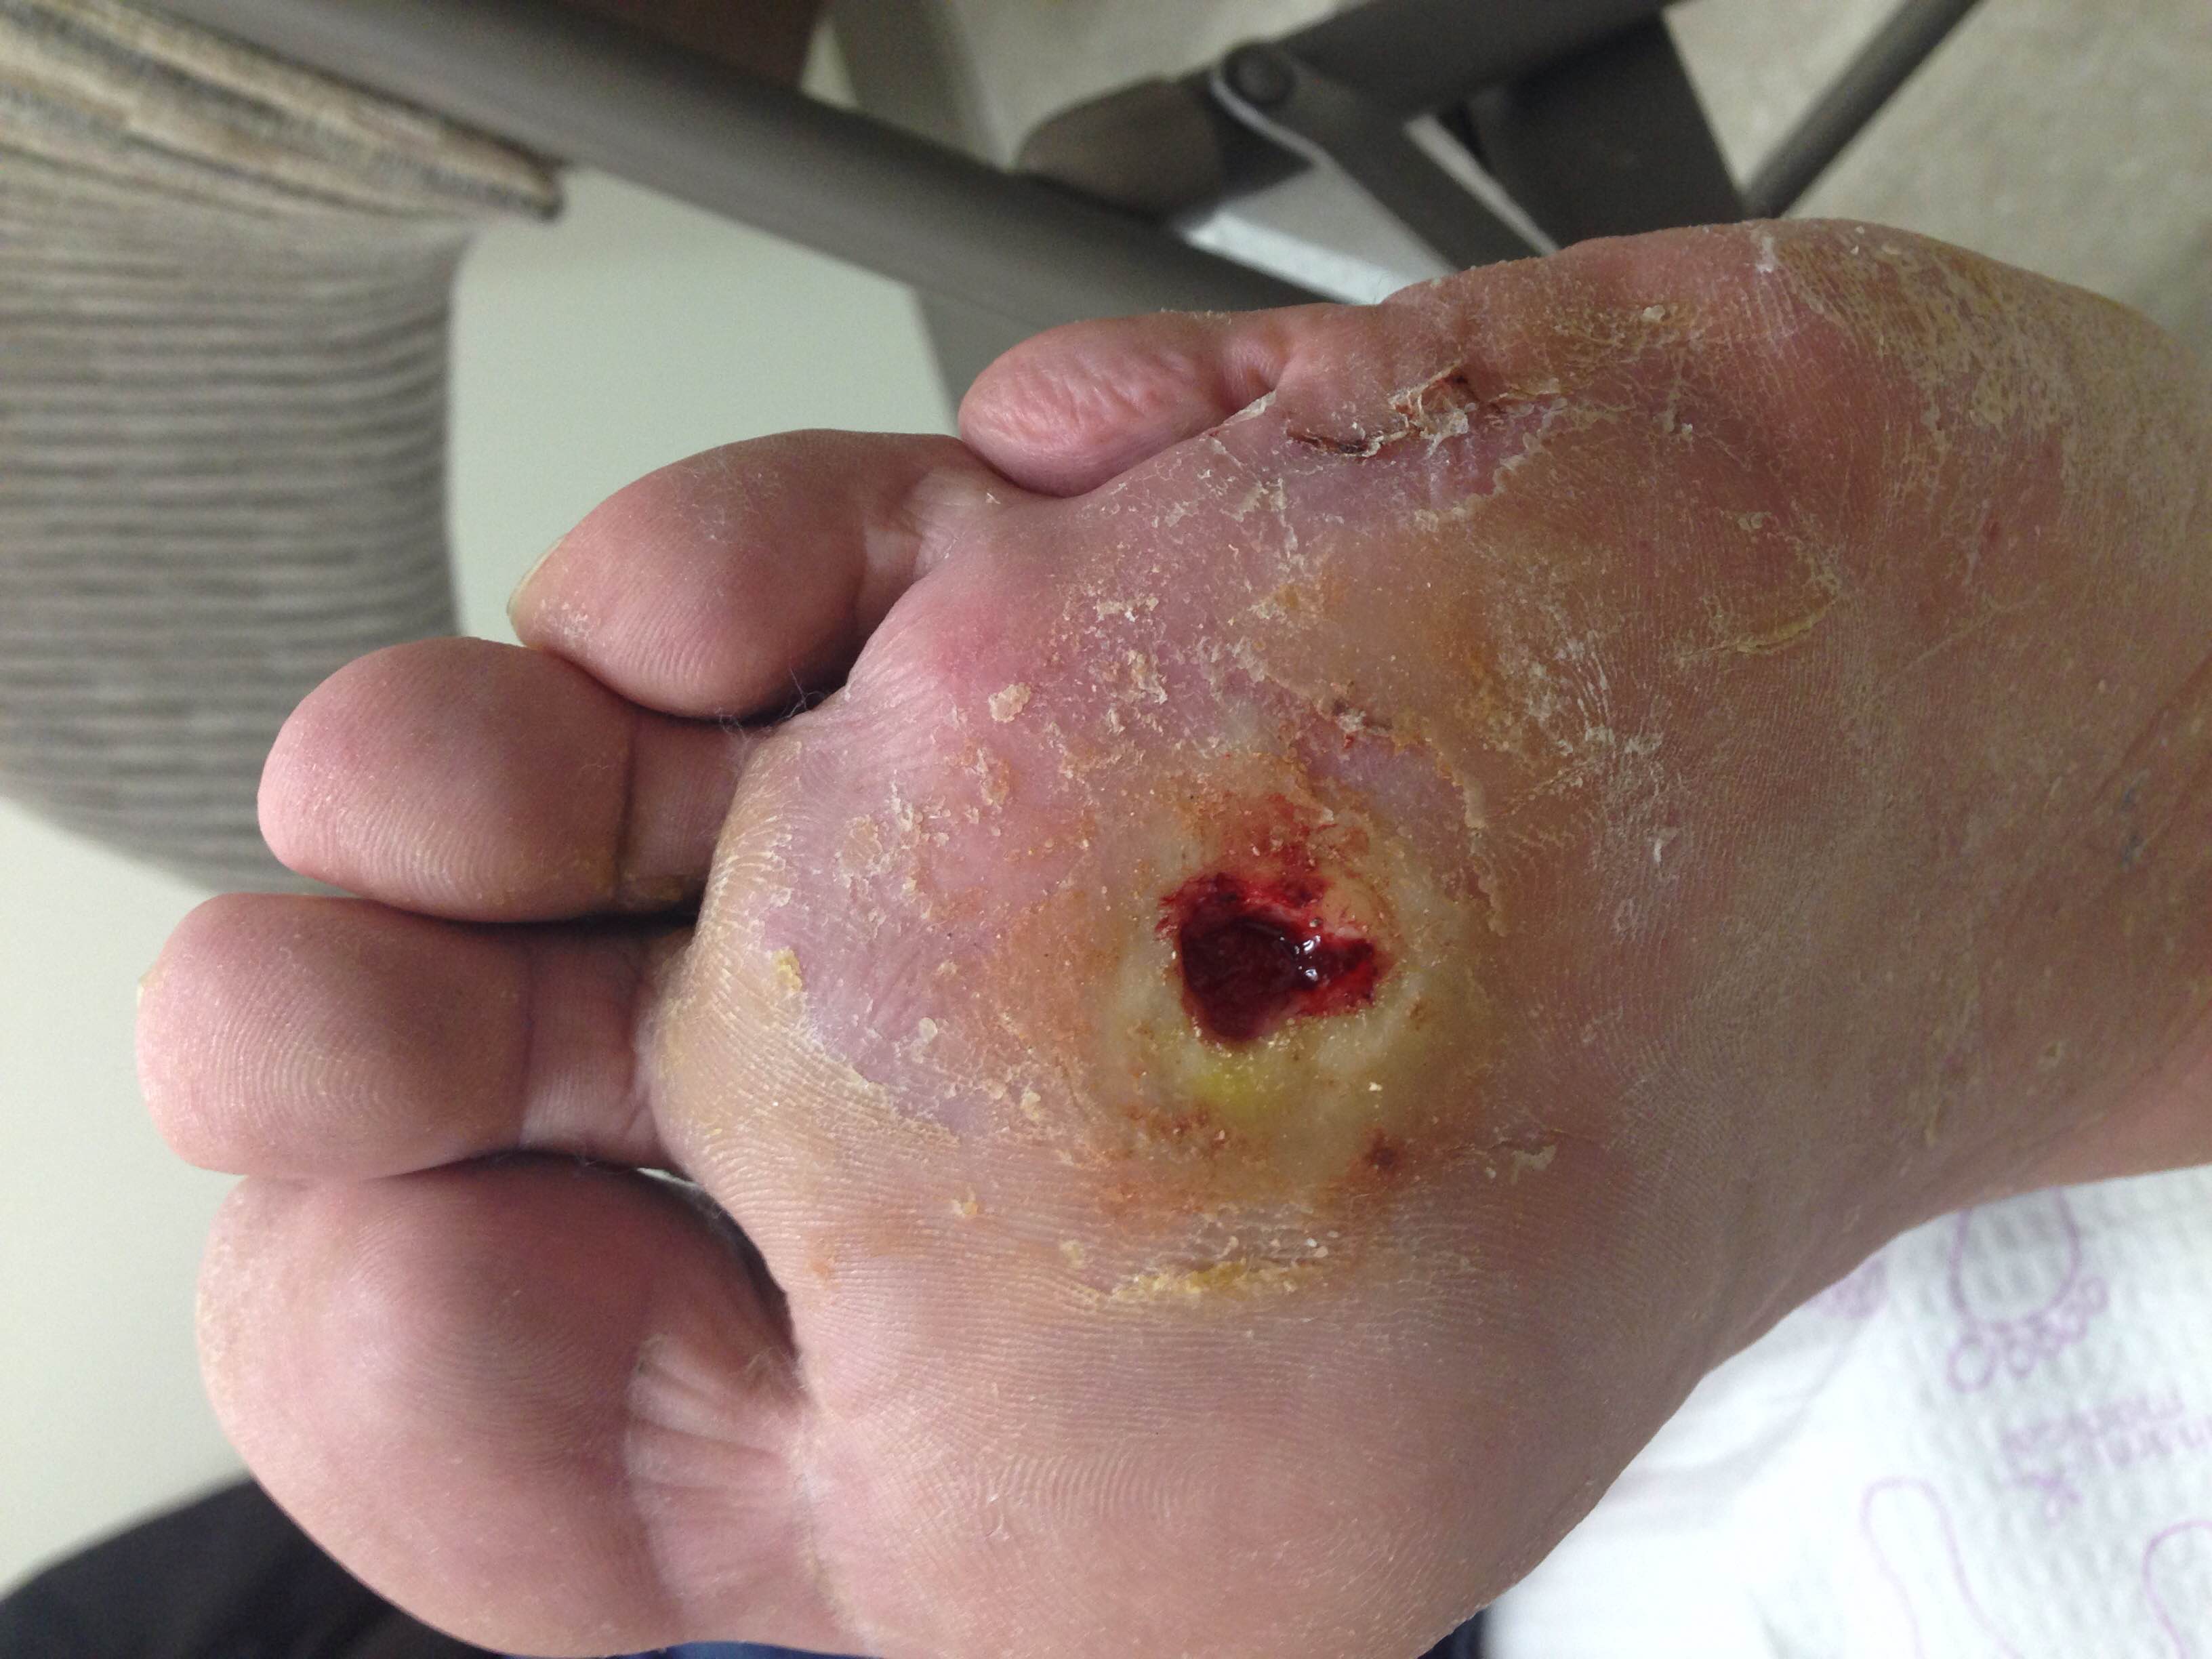 Foot Ulcer Pictures, Images & Photos | Photobucket